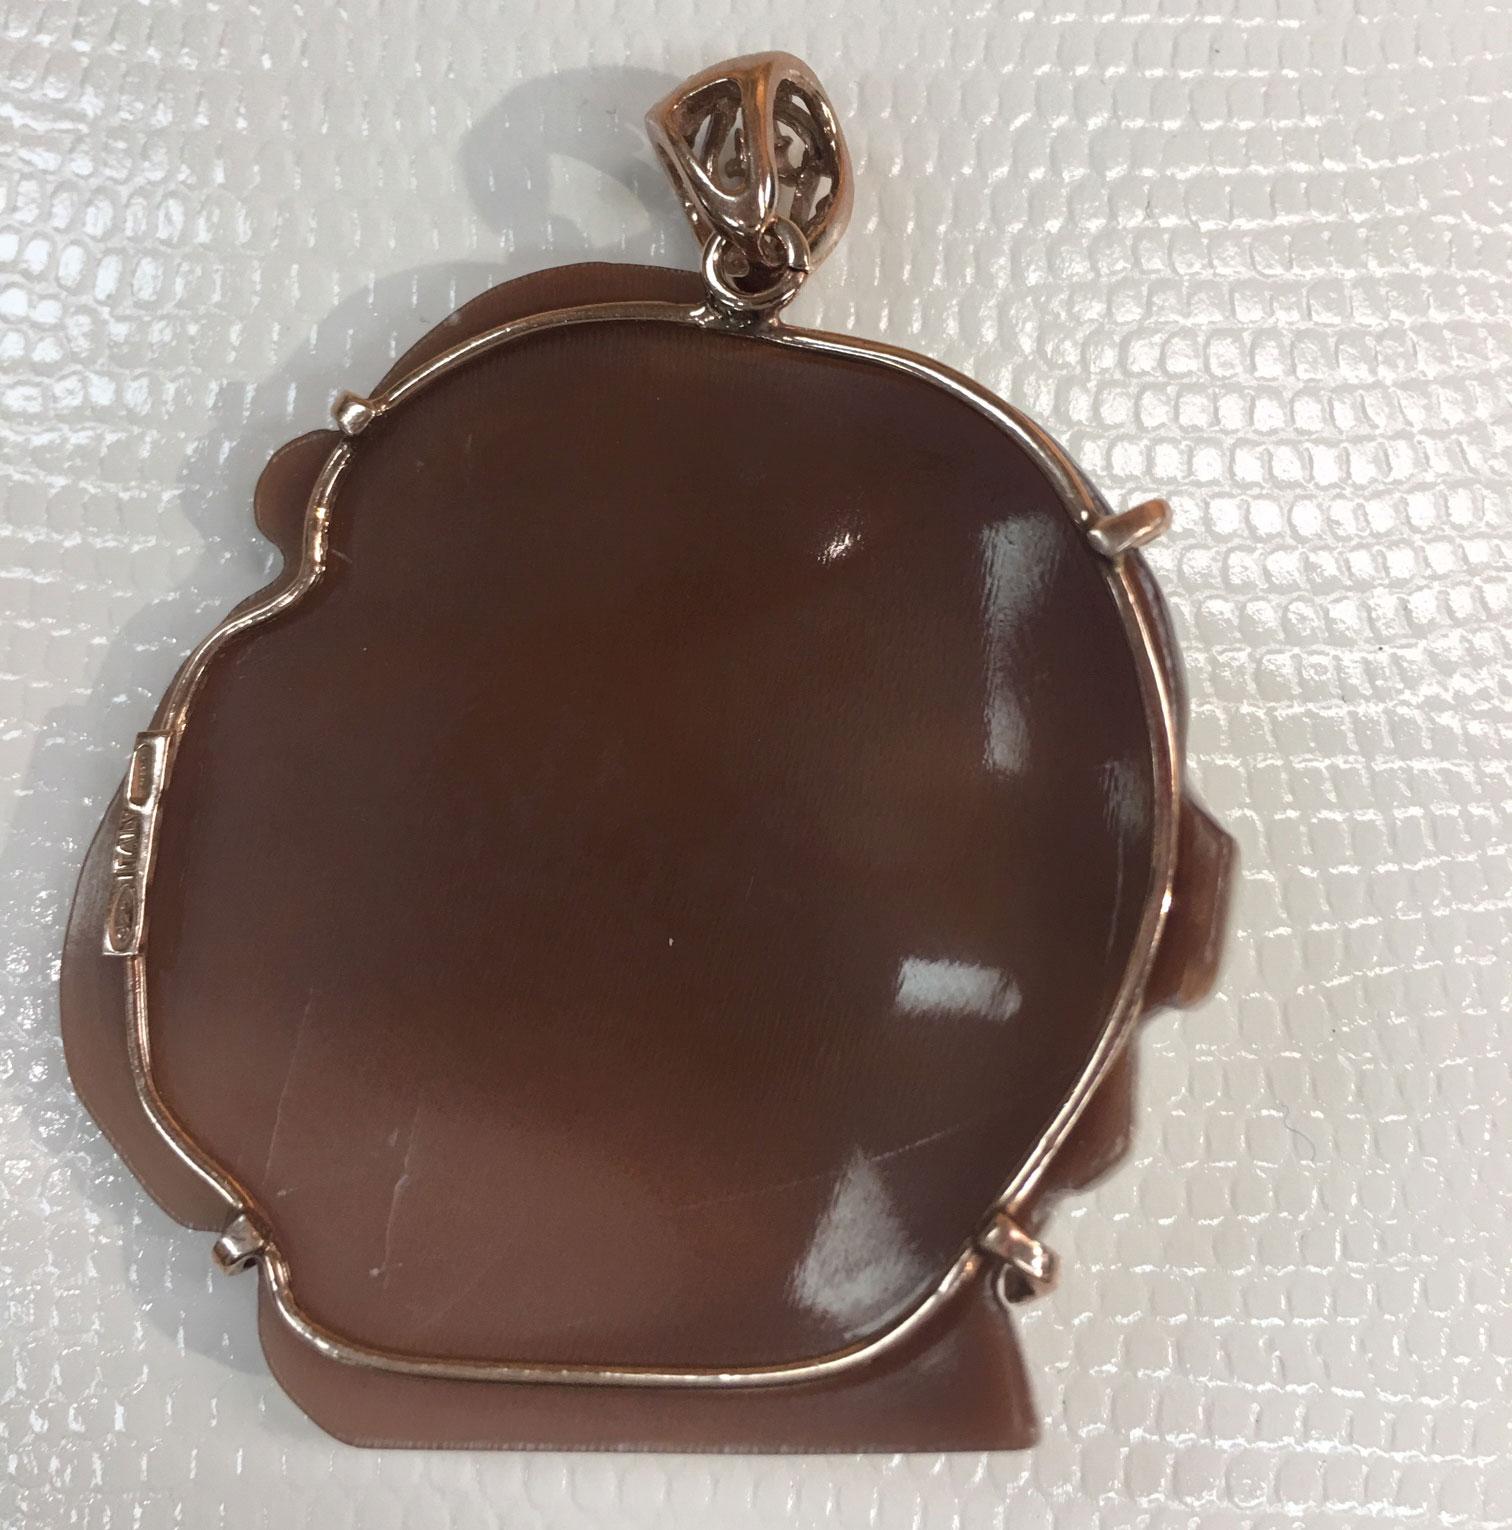 Hand carved shell Cameo Pendant, depicting the profile of a Subtlety Beautiful young girl with flowers in her hair, set in a Rose Gold Sterling Silver mounting. Rendered with remarkable detail and warmth, so unusual to find! Measuring approx. 2.25